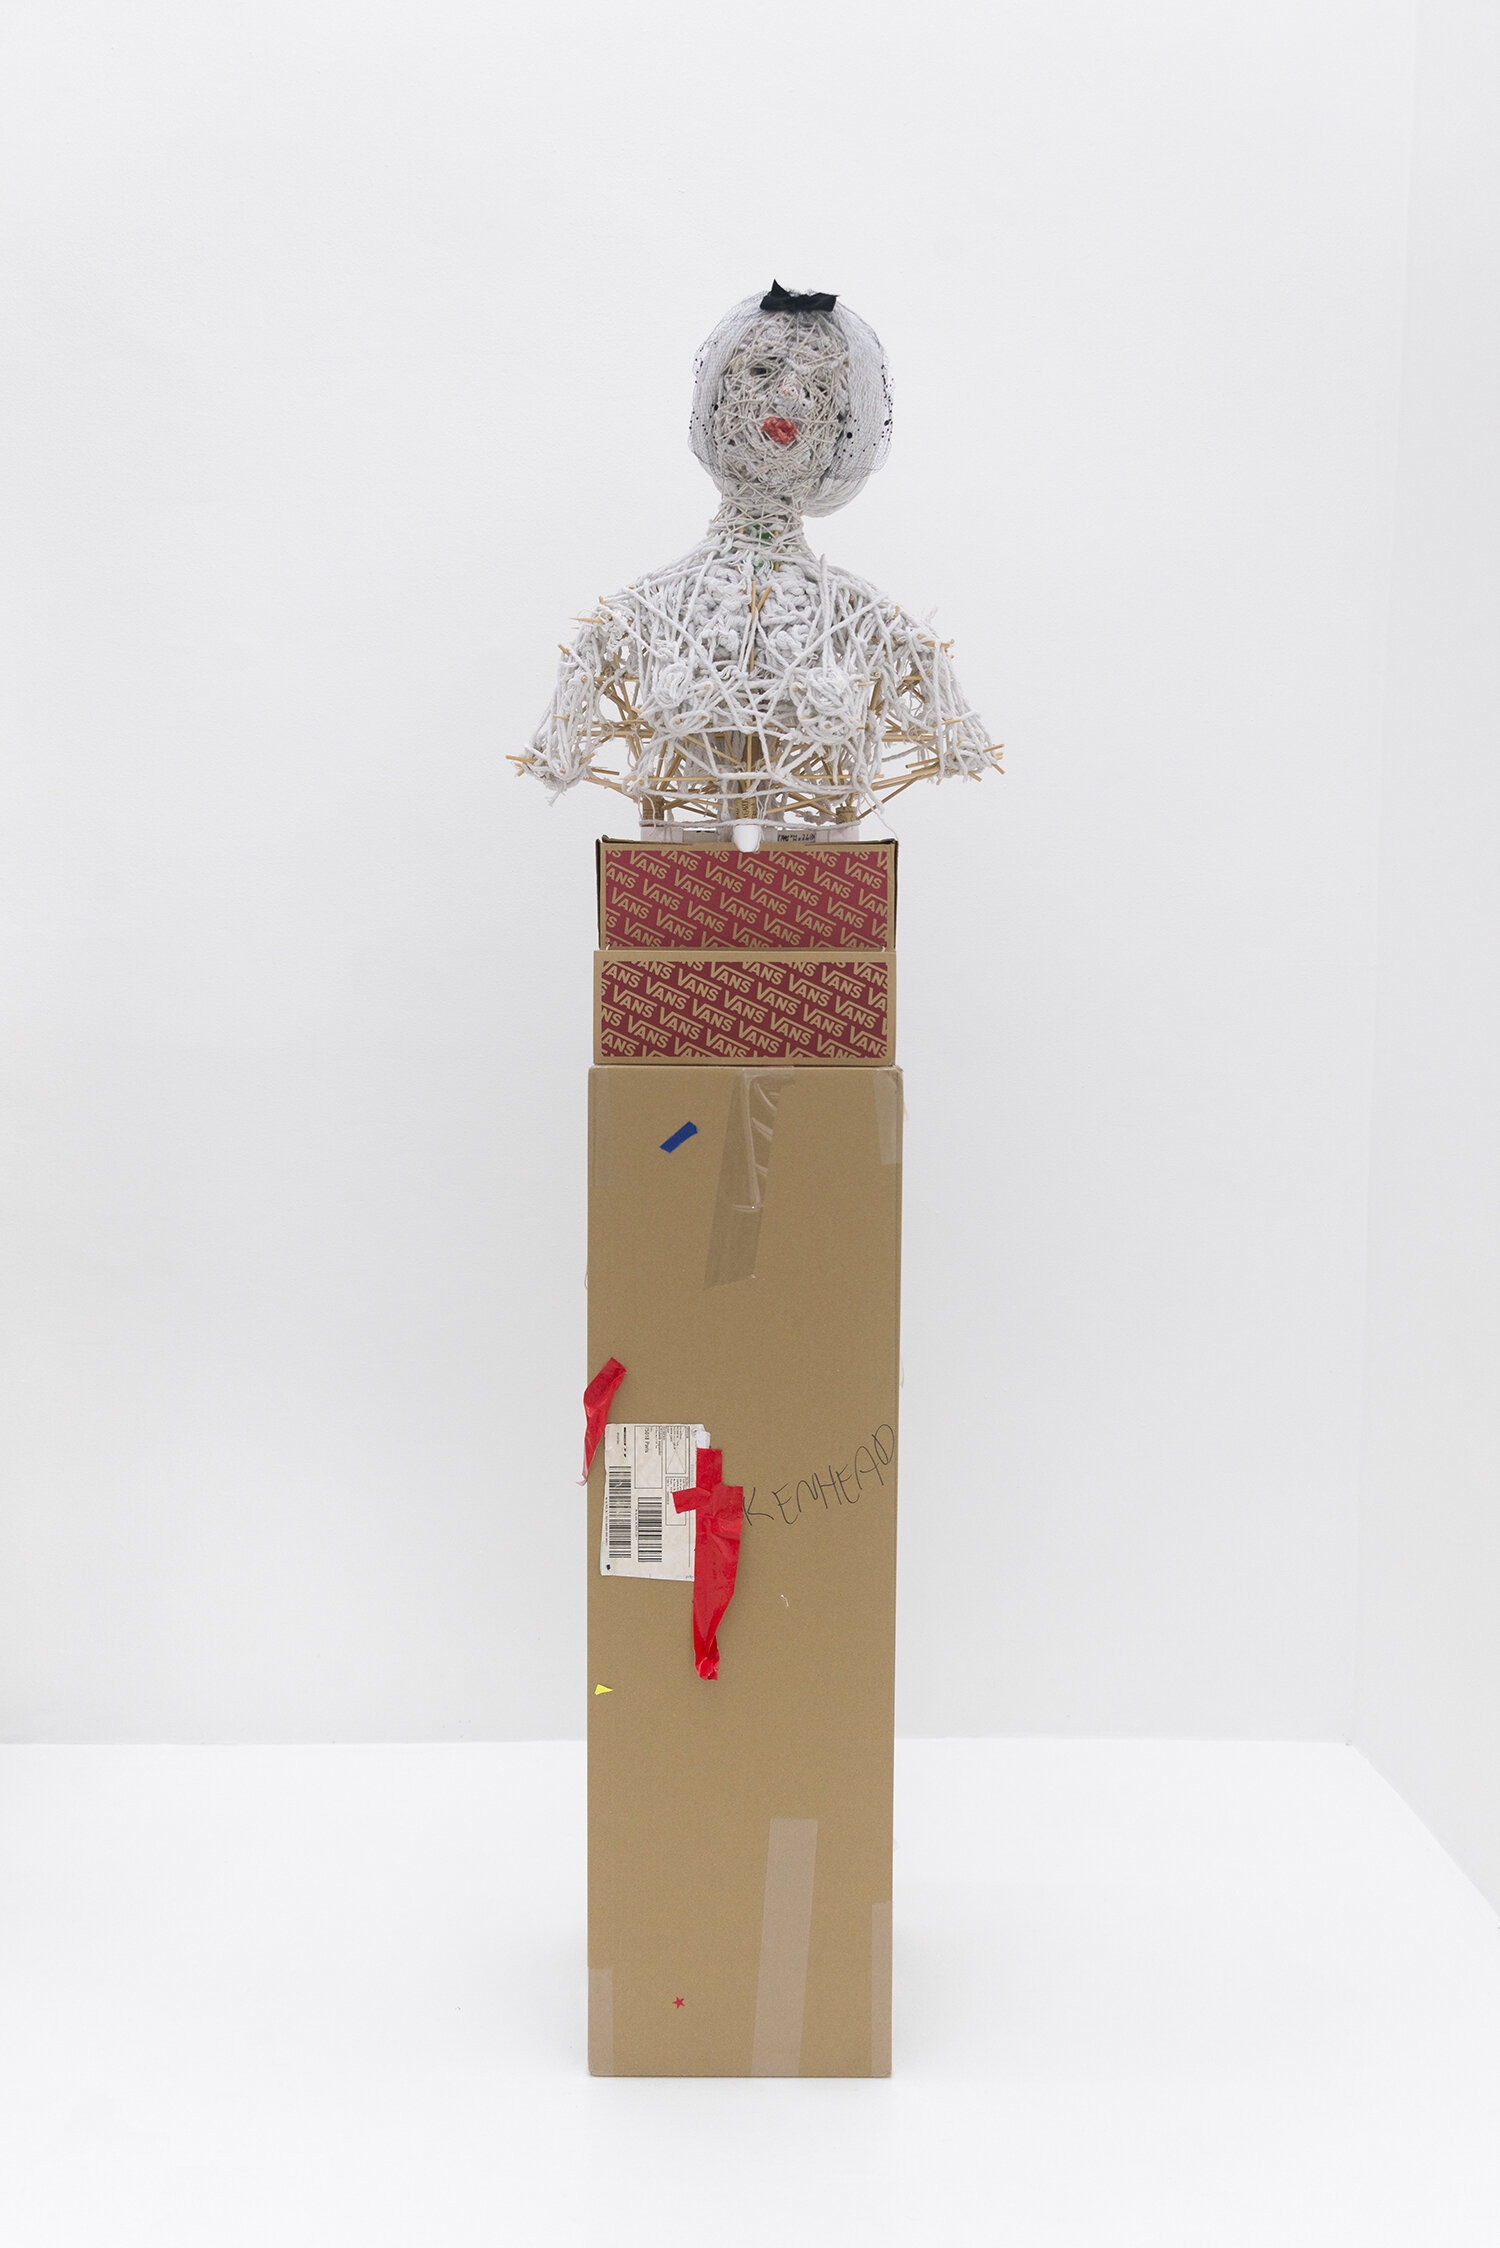   Monica,  2019, PVC, wood, cork, bamboo, plastic, cotton, wax, hat pedestal: cardboard, cotton twine 72 x 21 x 12 in (bust only 23 x 21 x 11 in) 